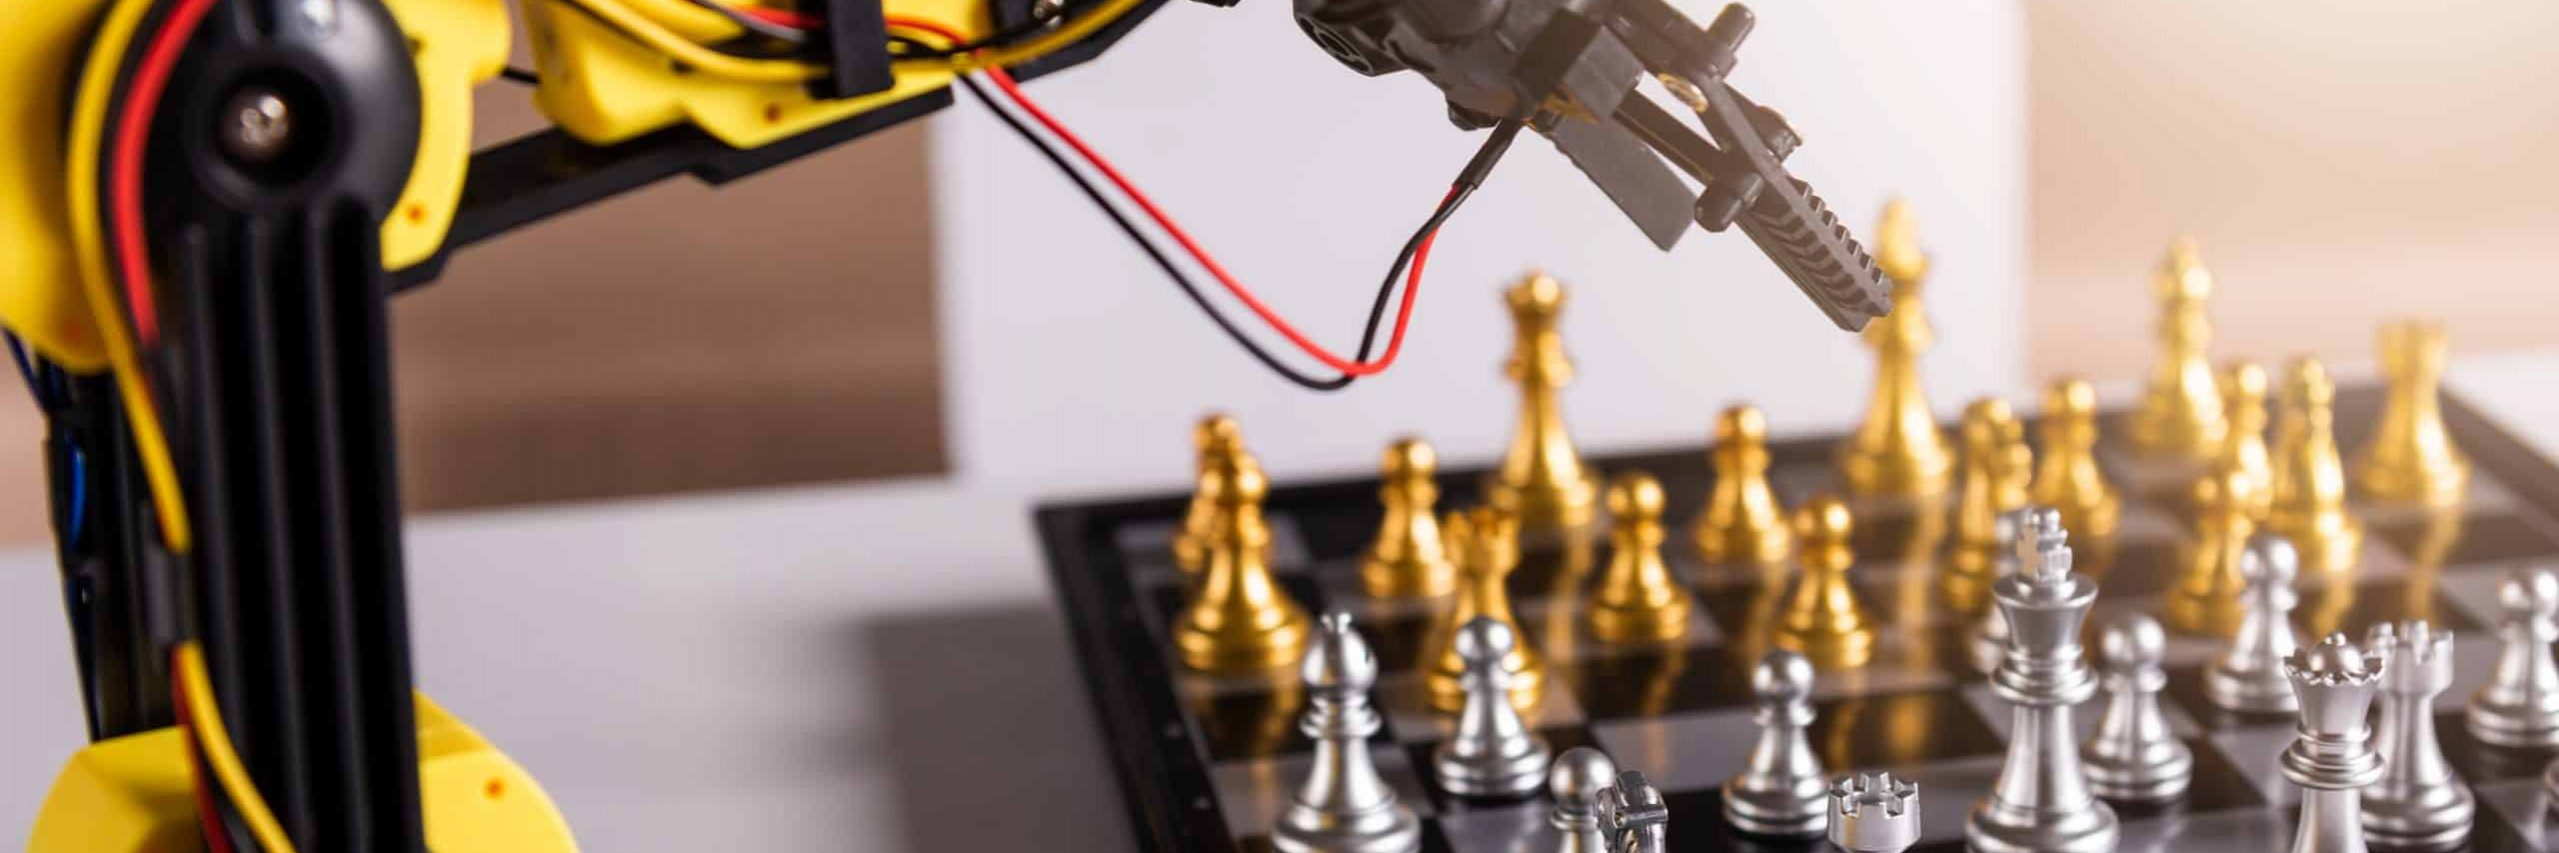 Robot arm on chessboard